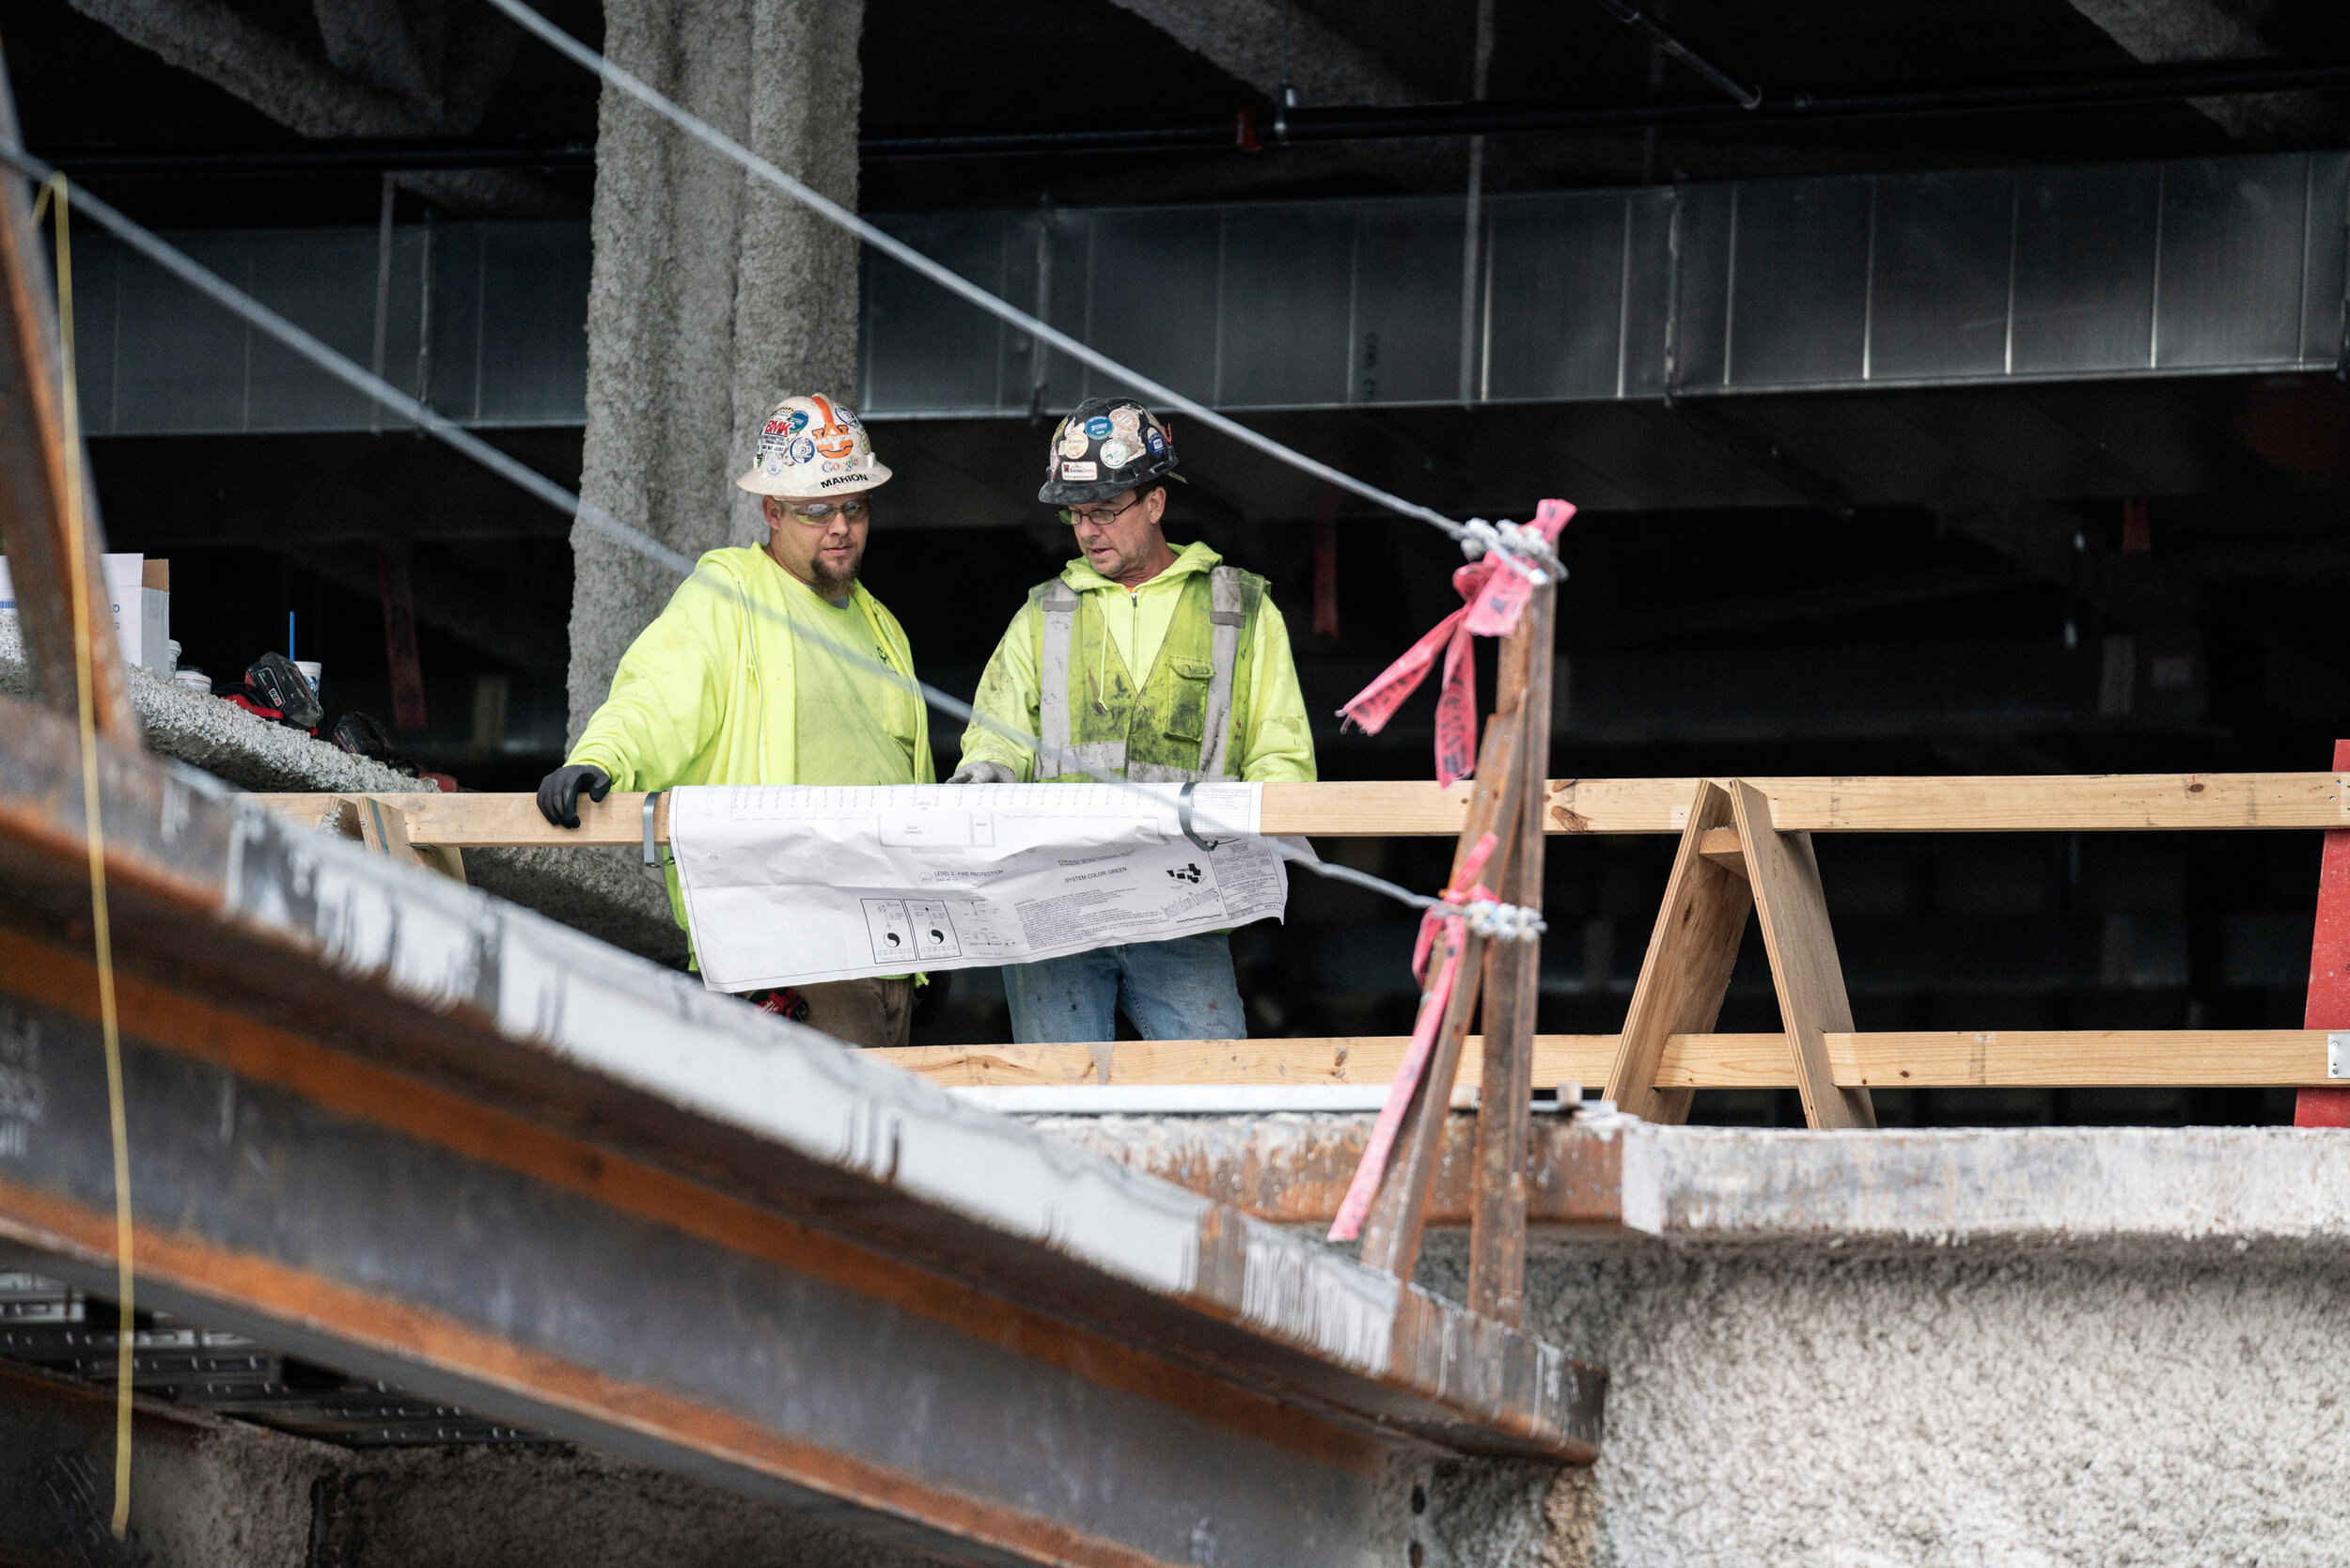 Construction workers examine plans.